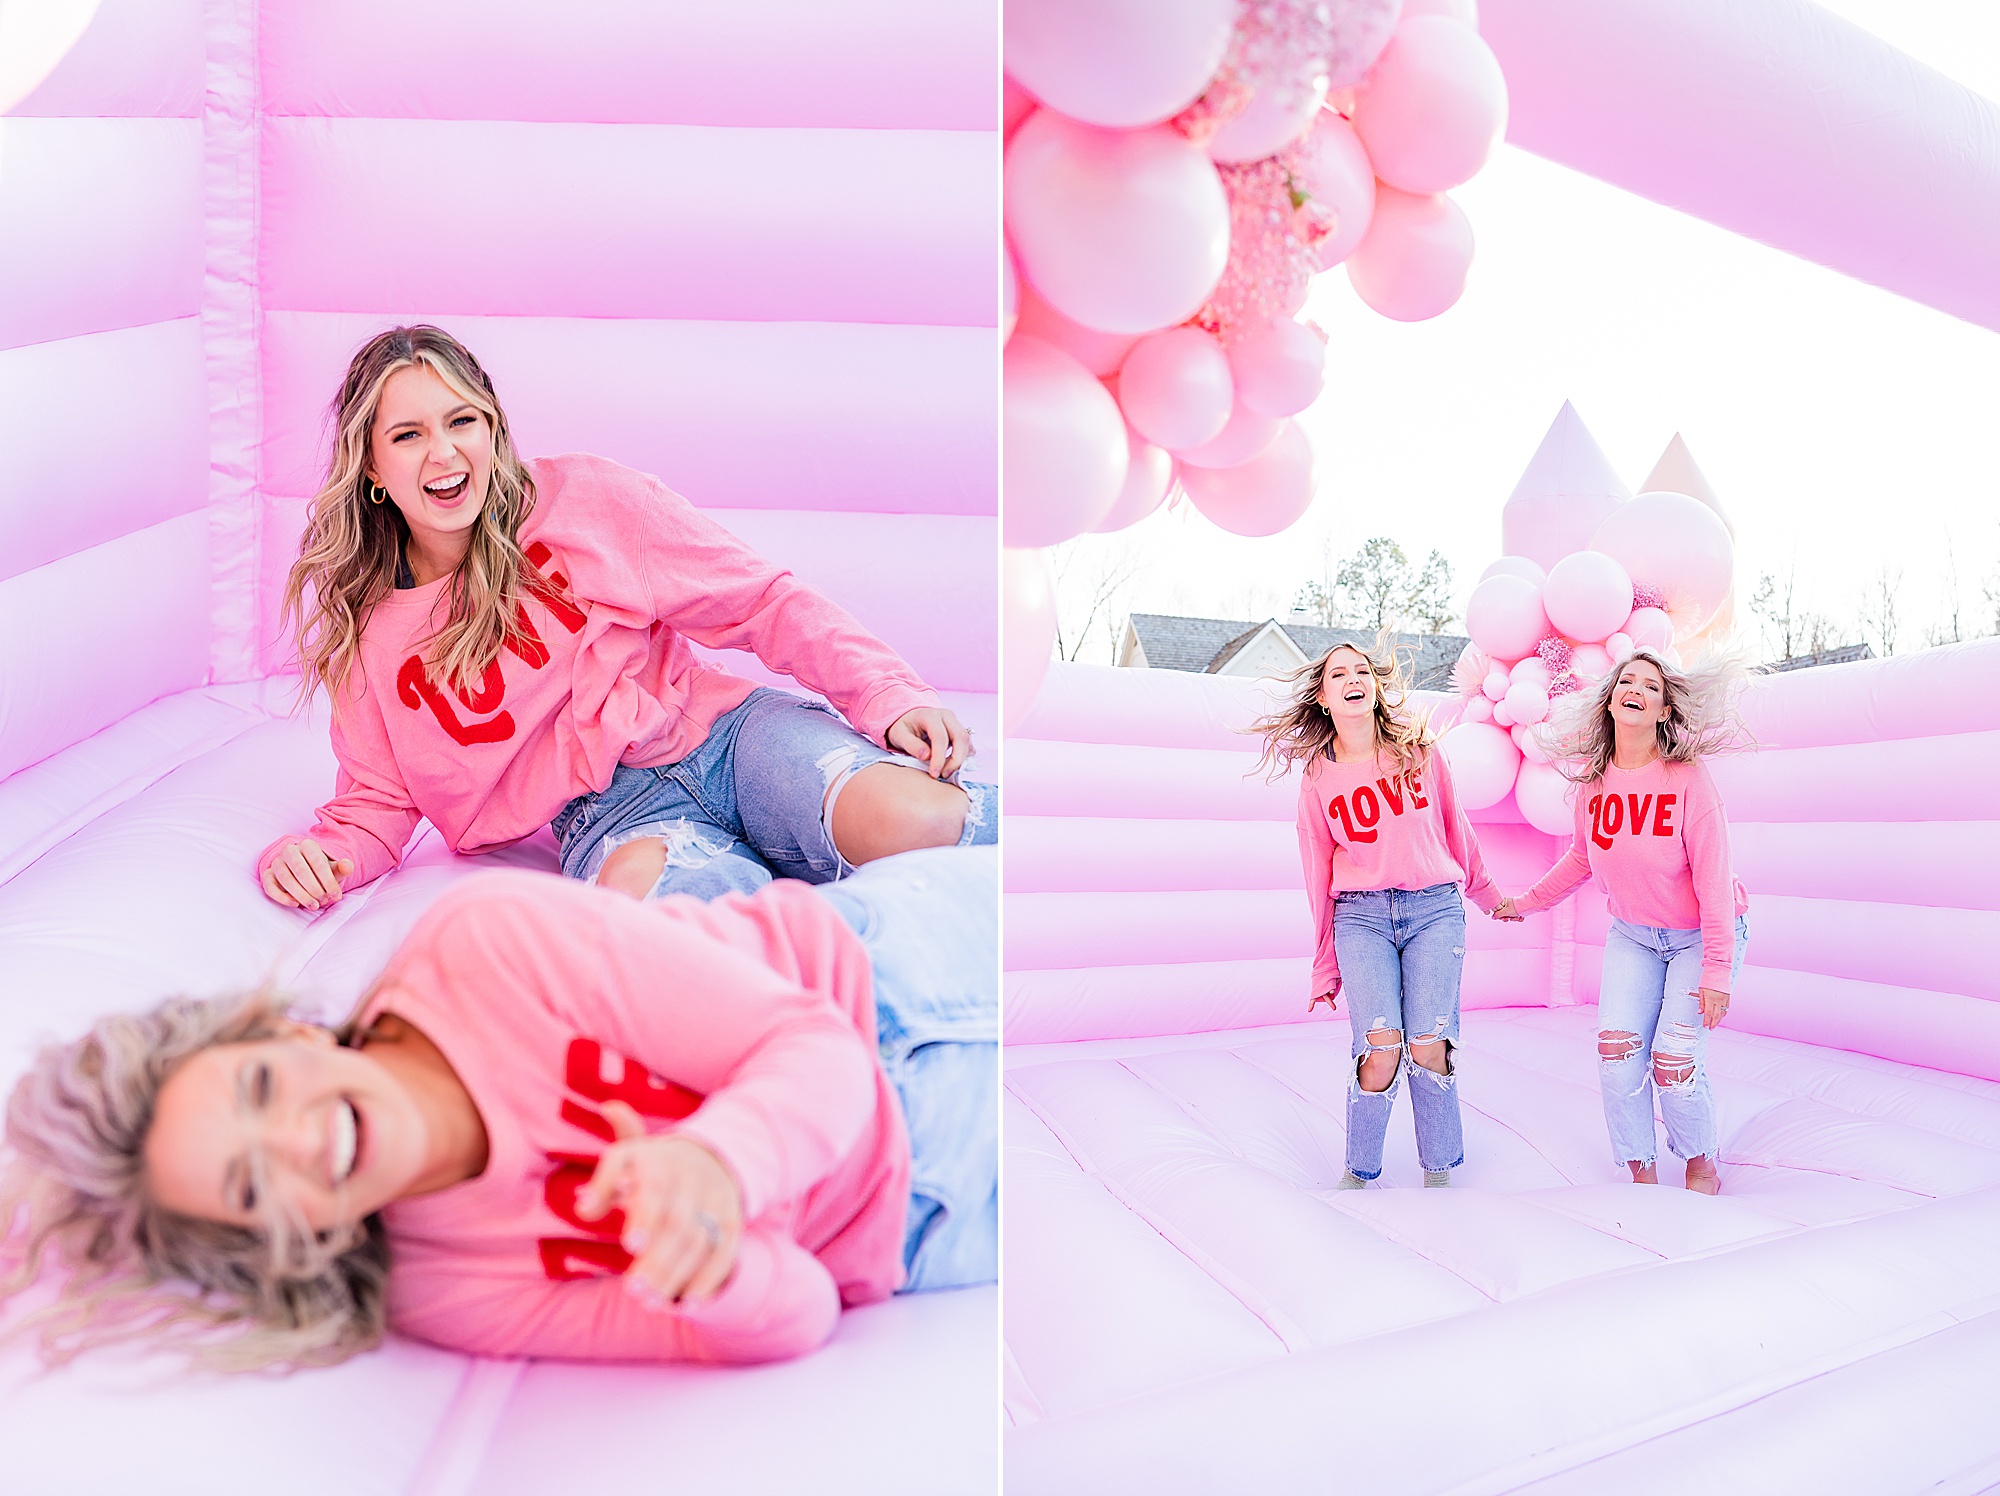 women in matching pink sweaters play on pink bounce house